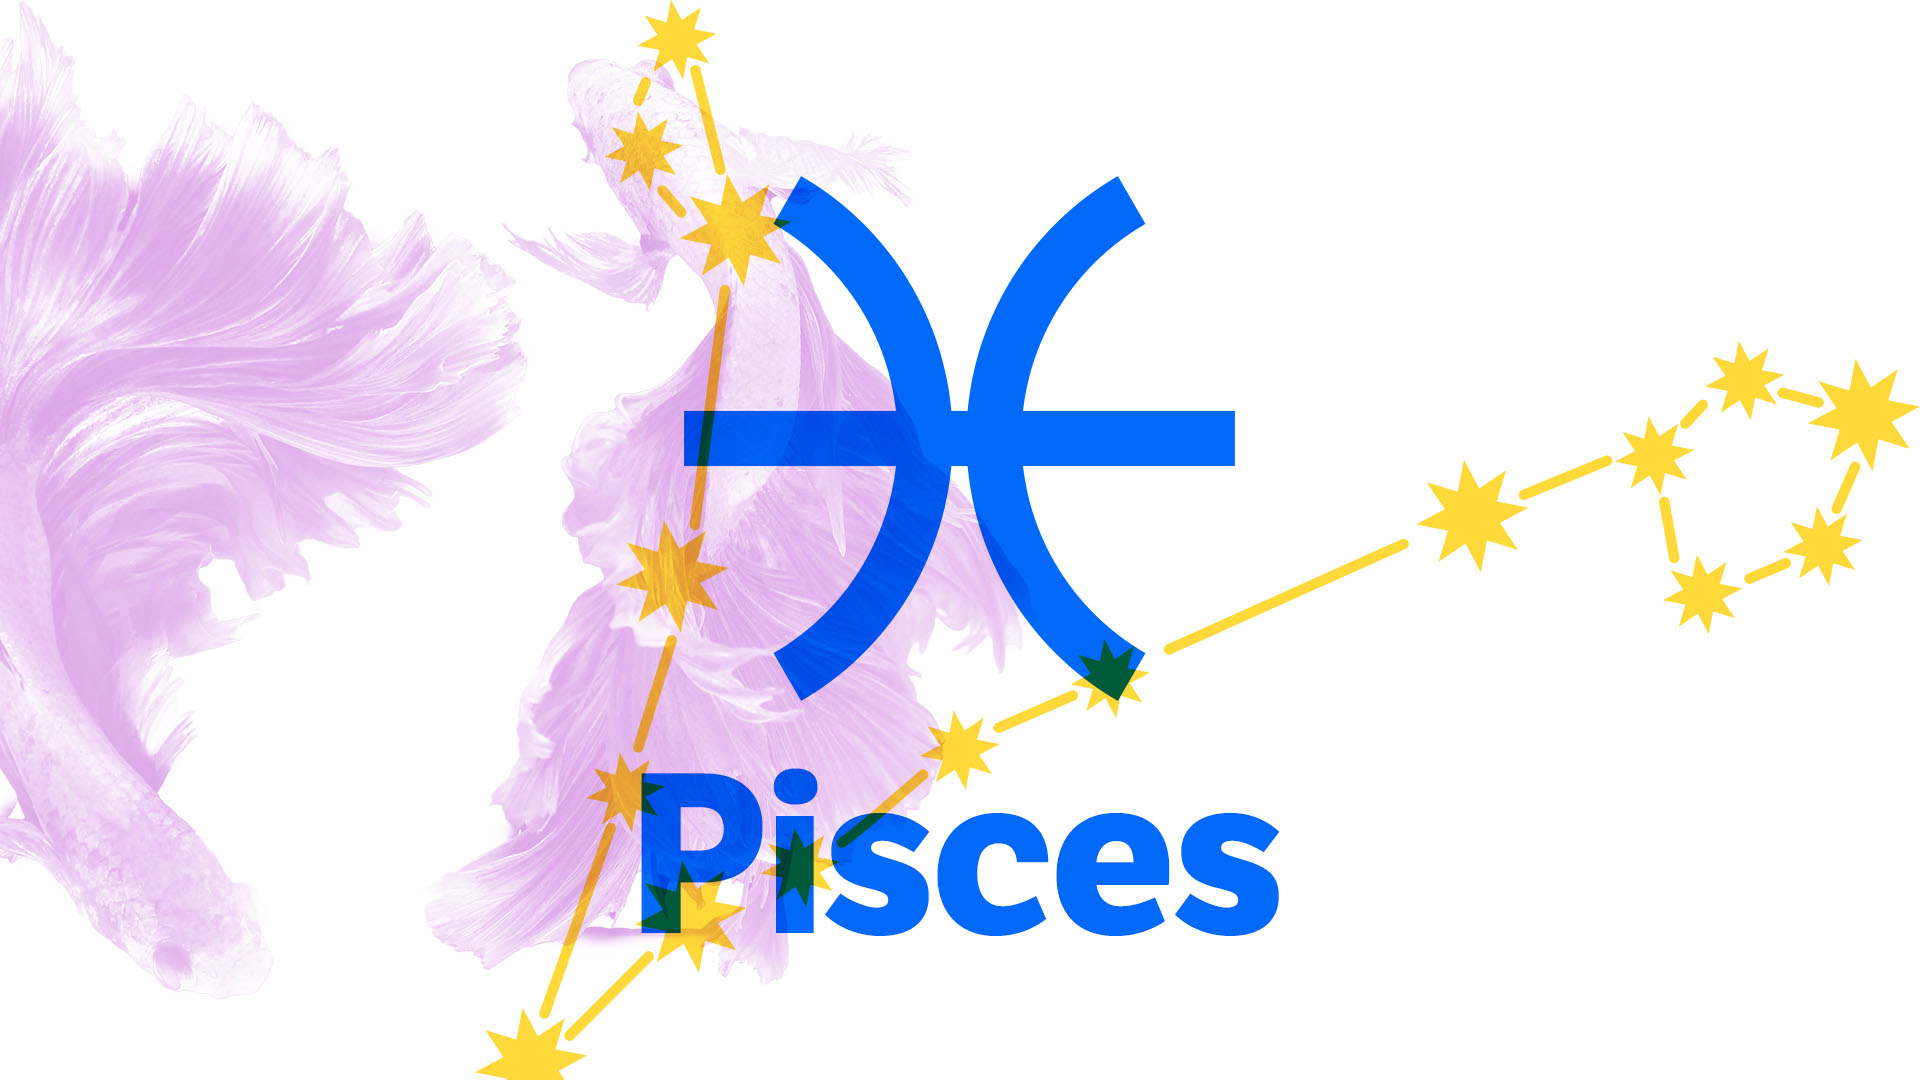 Can You Fill In The Blank? Pisces People Are _______